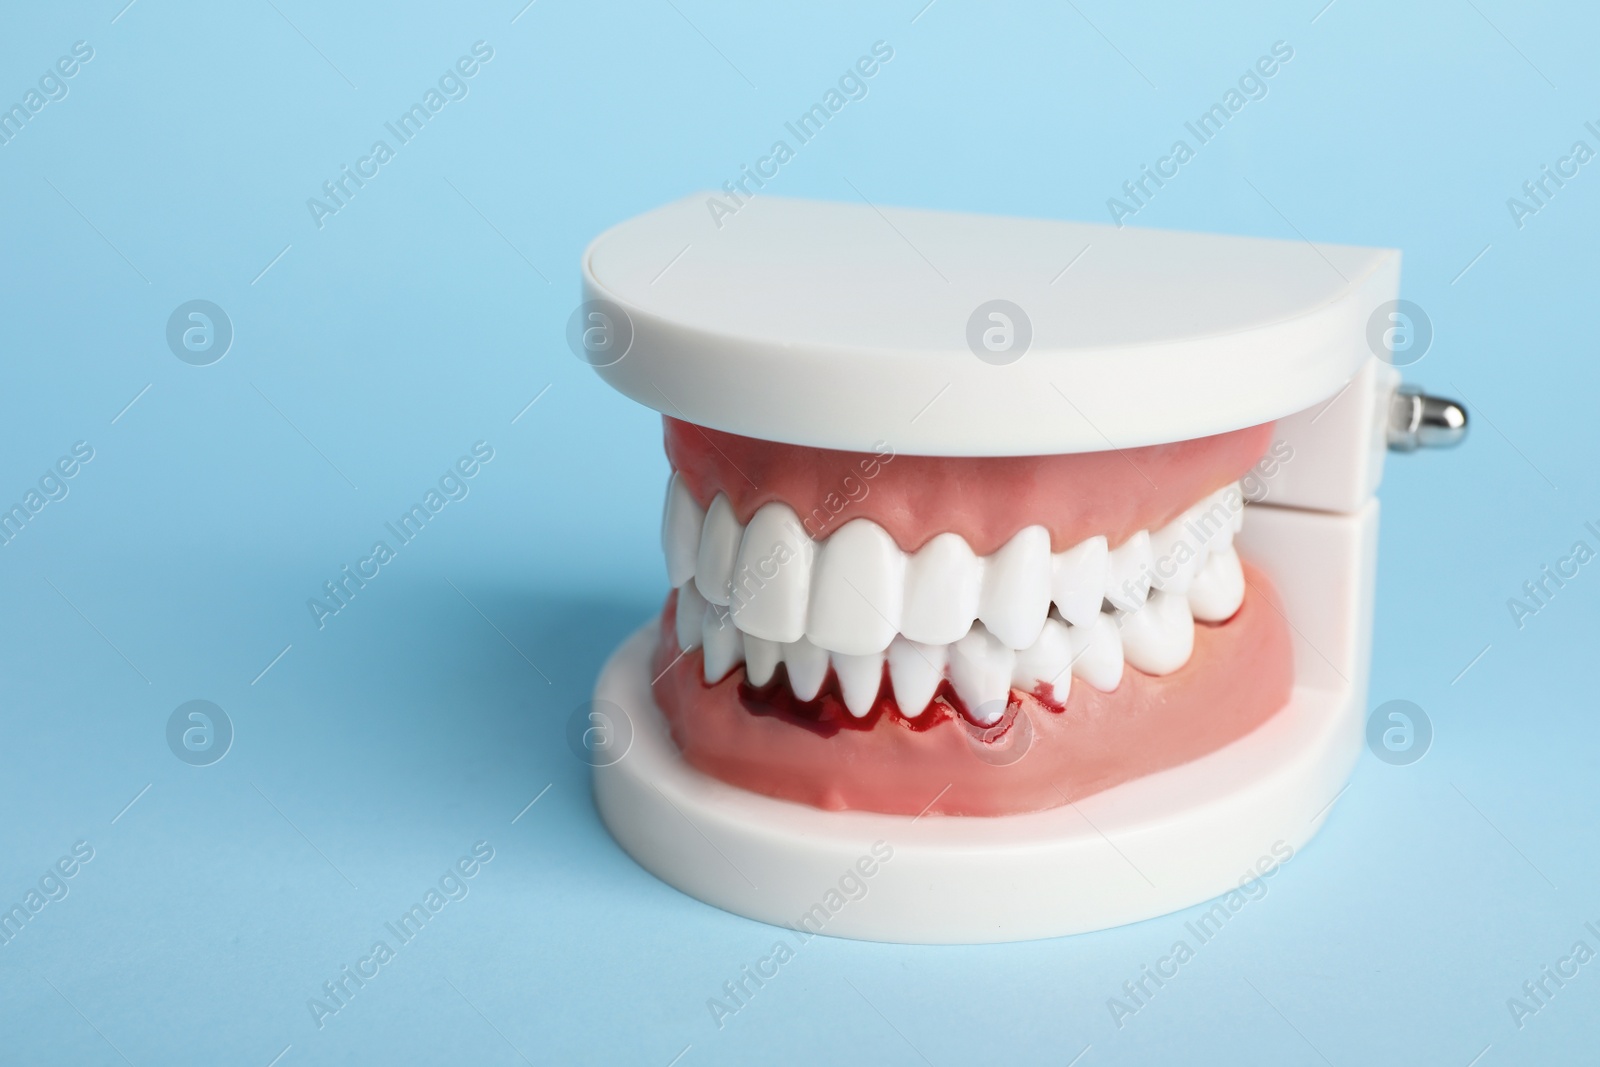 Photo of Jaw model with blood on teeth against light blue background, space for text. Gum inflammation